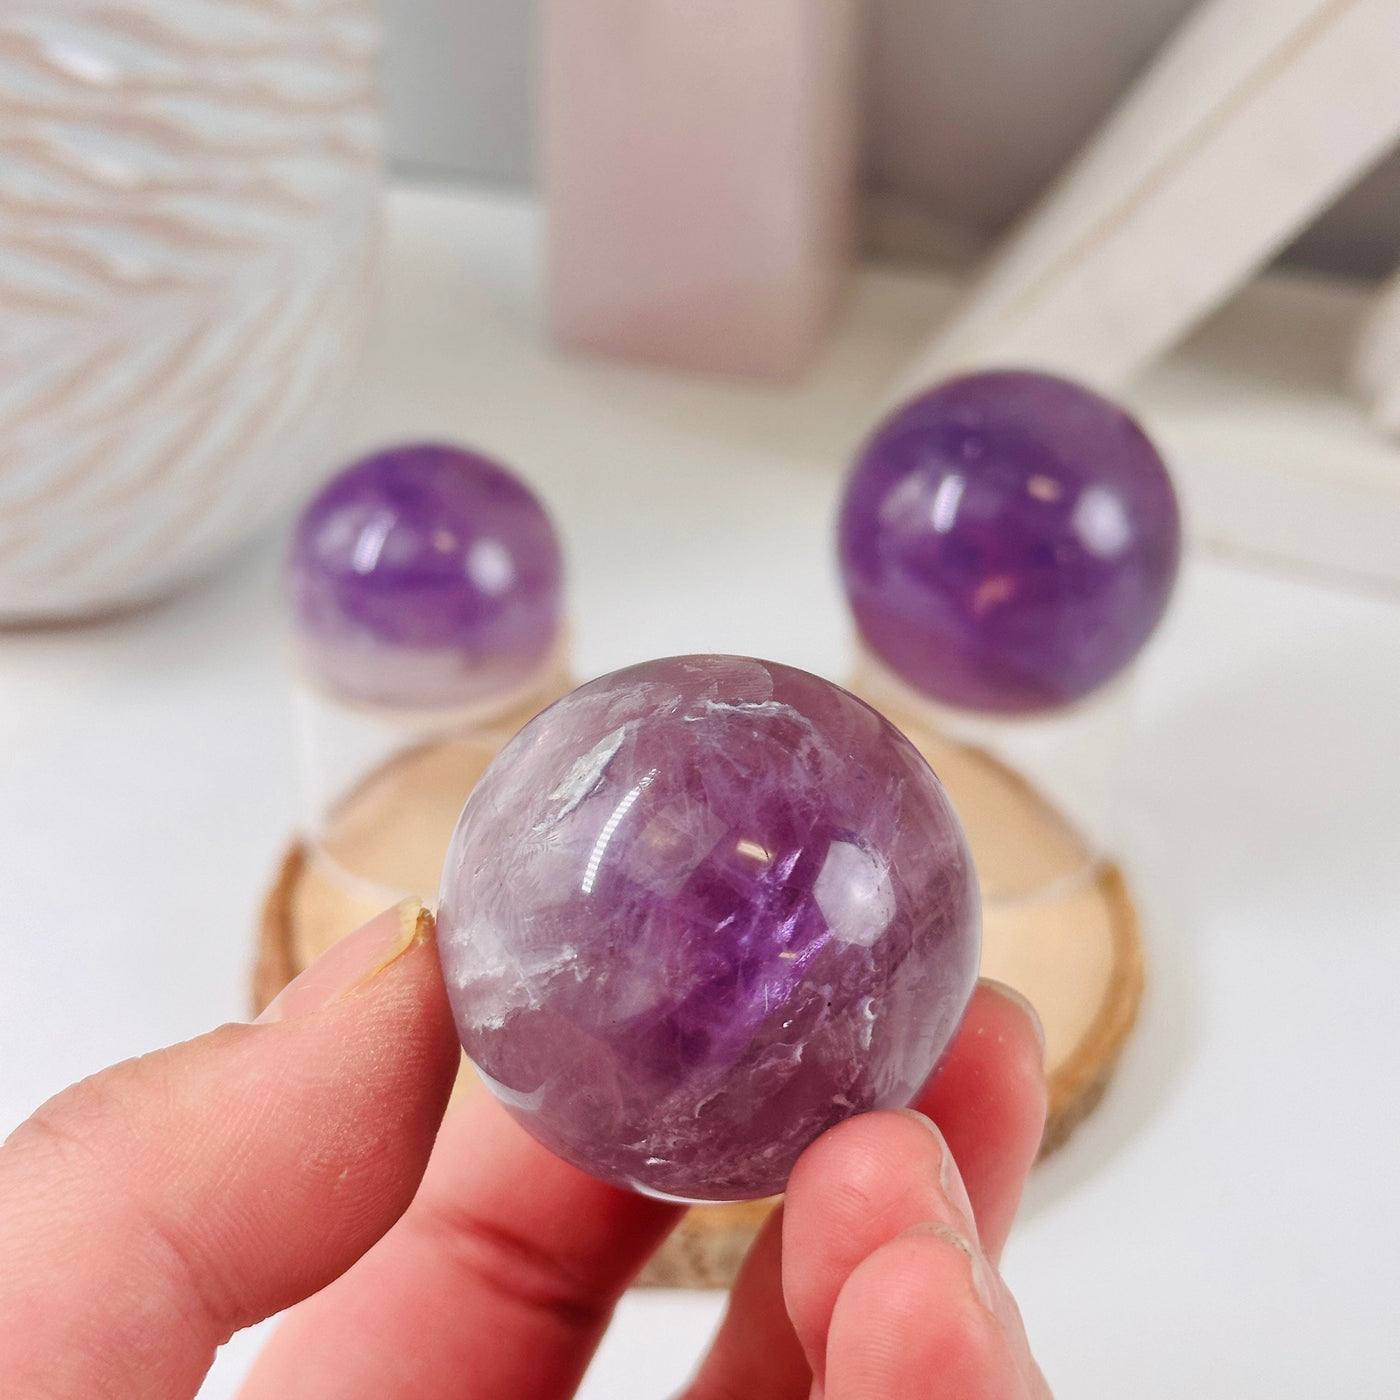 Amethyst Polished Sphere - Crystal Ball - YOU CHOOSE variant A in hand for size reference